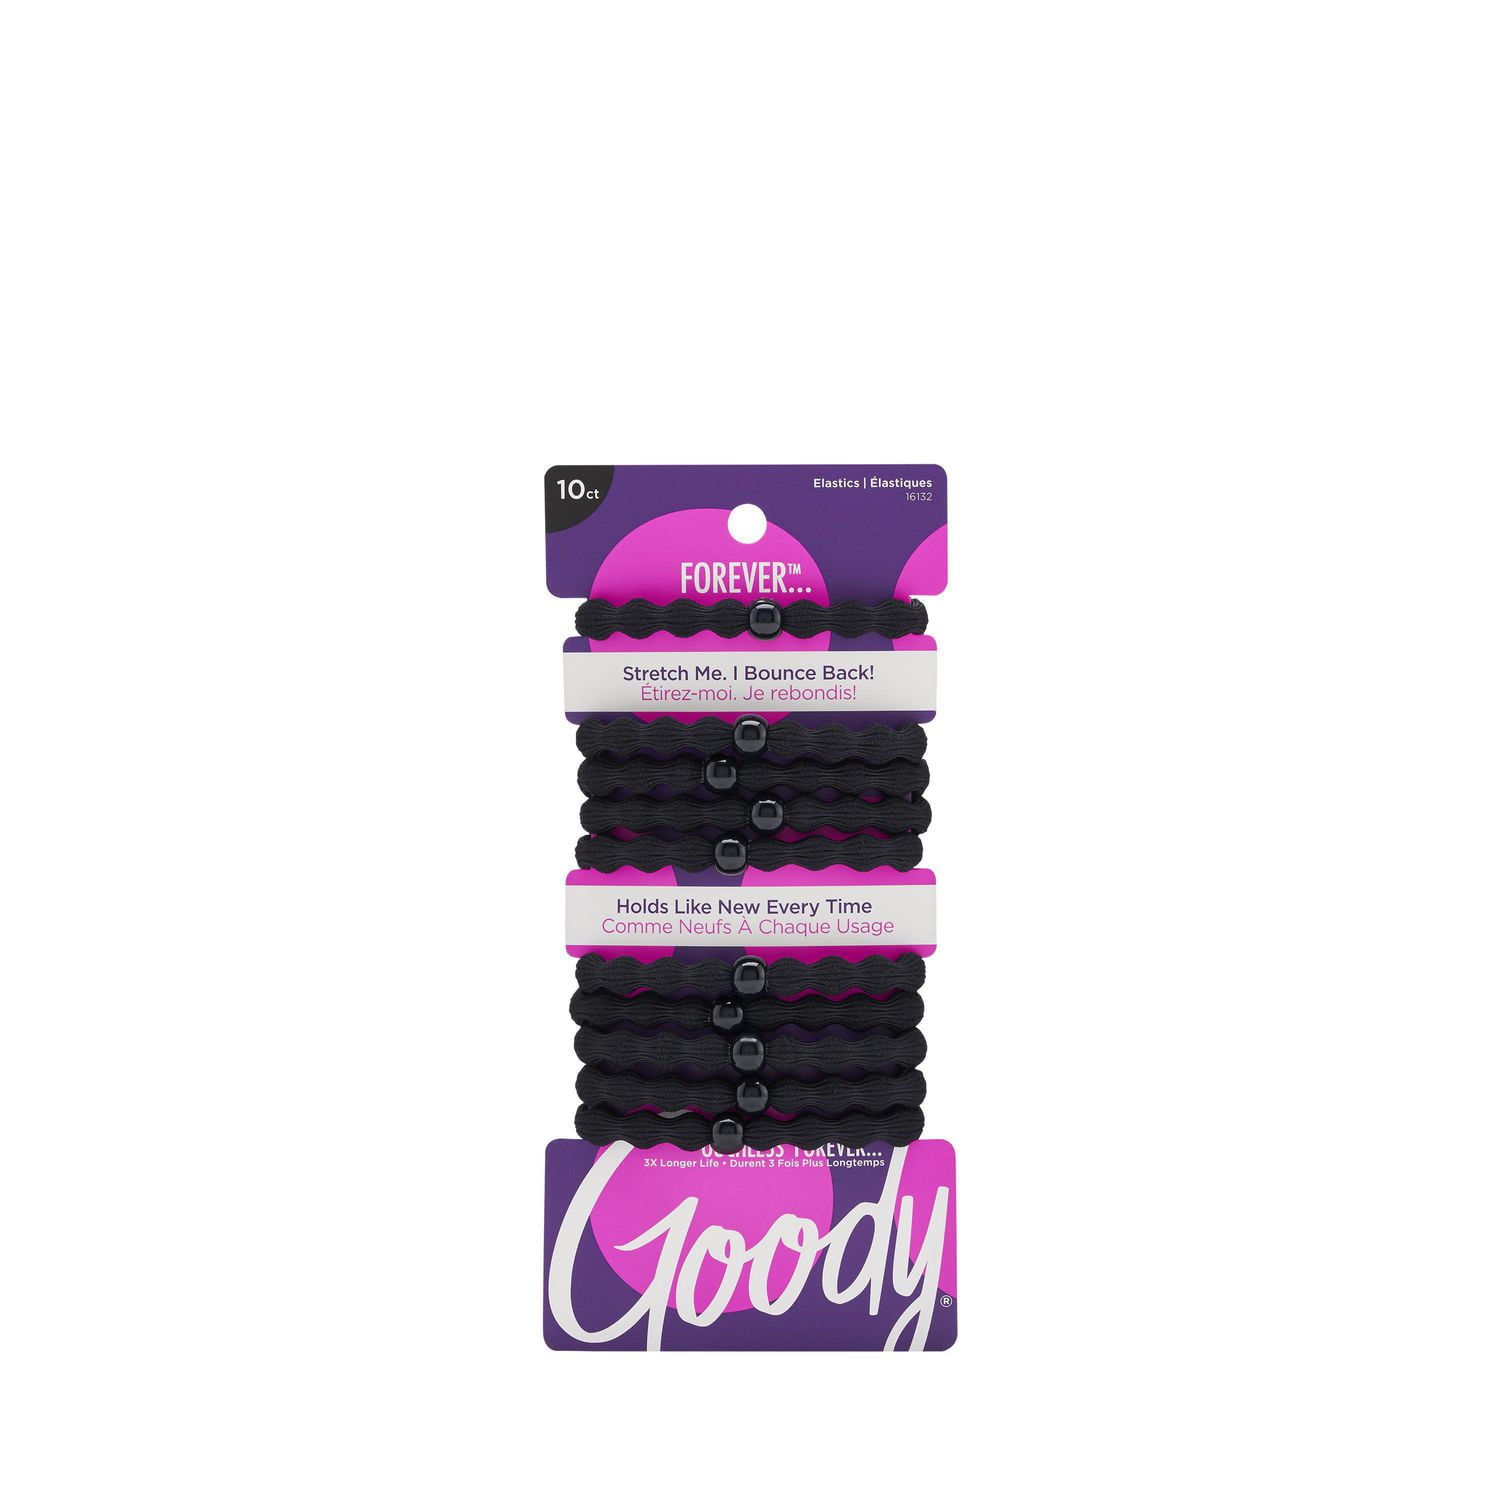  GOODY Ouchless XL & Extra Thick Elastics, Black, 10.0